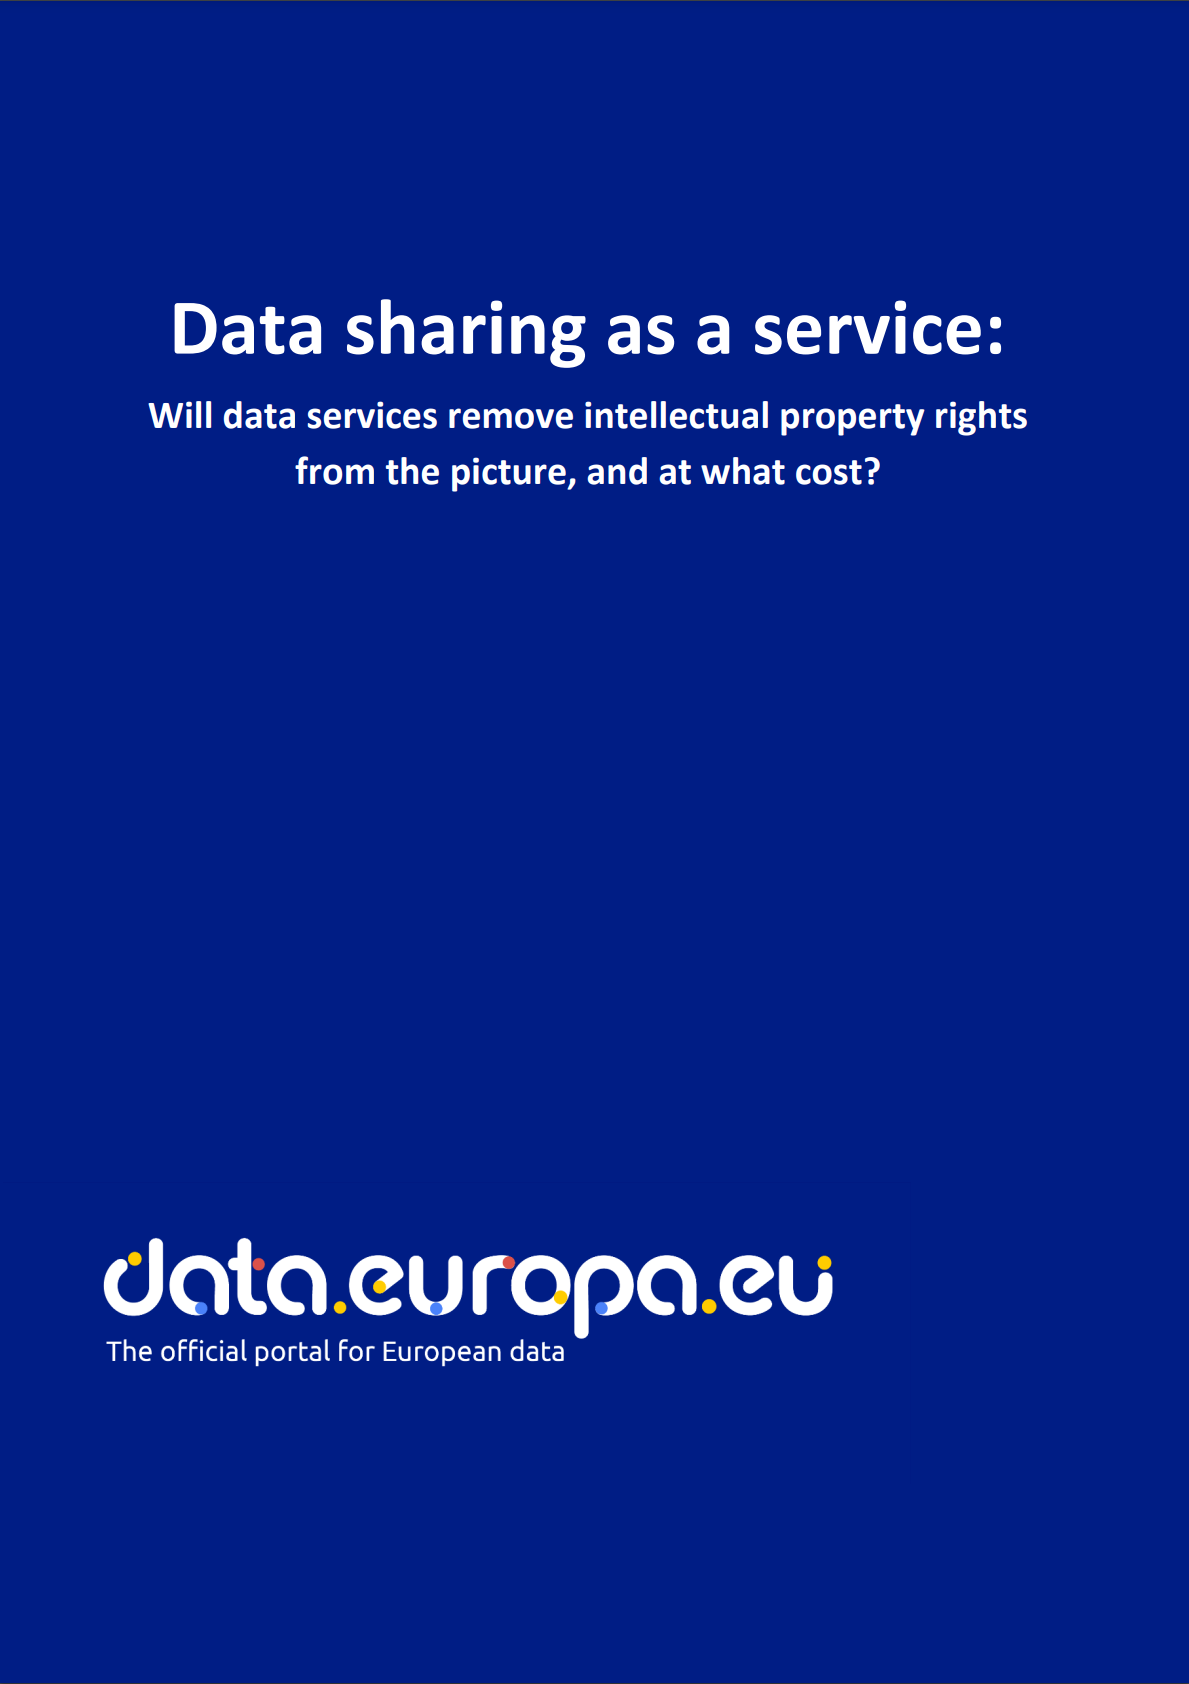 Data sharing as a service: will data services remove intellectual property rights from the picture, and at what cost?